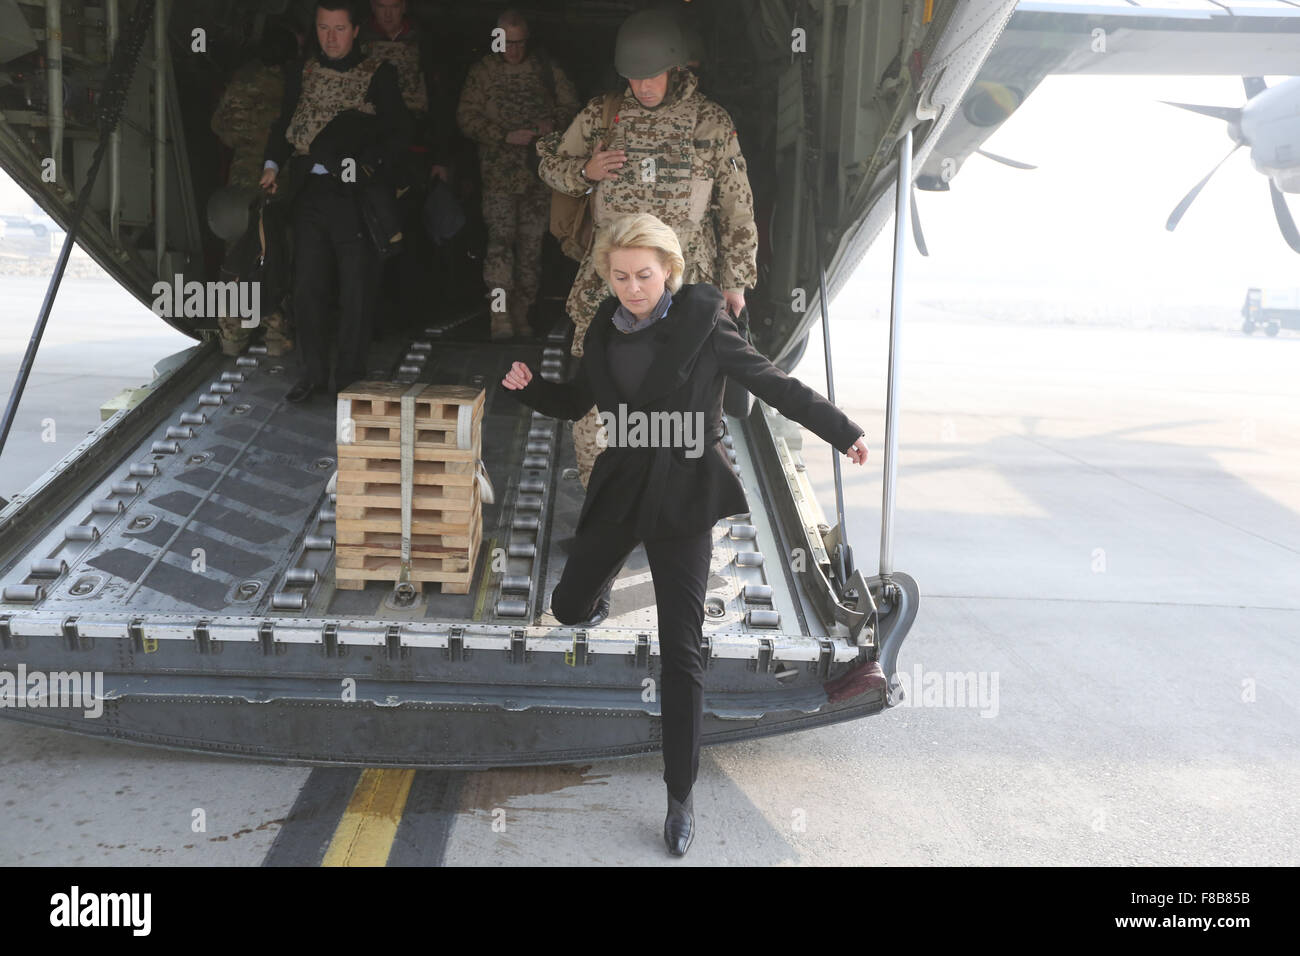 Kabul, Afghanistan. 8th Dec, 2015. German Defence Minister Ursula von der Leyen (CDU) arrives in a US airforce Hercules transport plane at the airport in Kabul, Afghanistan, 8 December 2015. In Kabul, von der Leyen is also meeting with Afghanistan's President Ghani. PHOTO: KAY NIETFELD/DPA/Alamy Live News Stock Photo